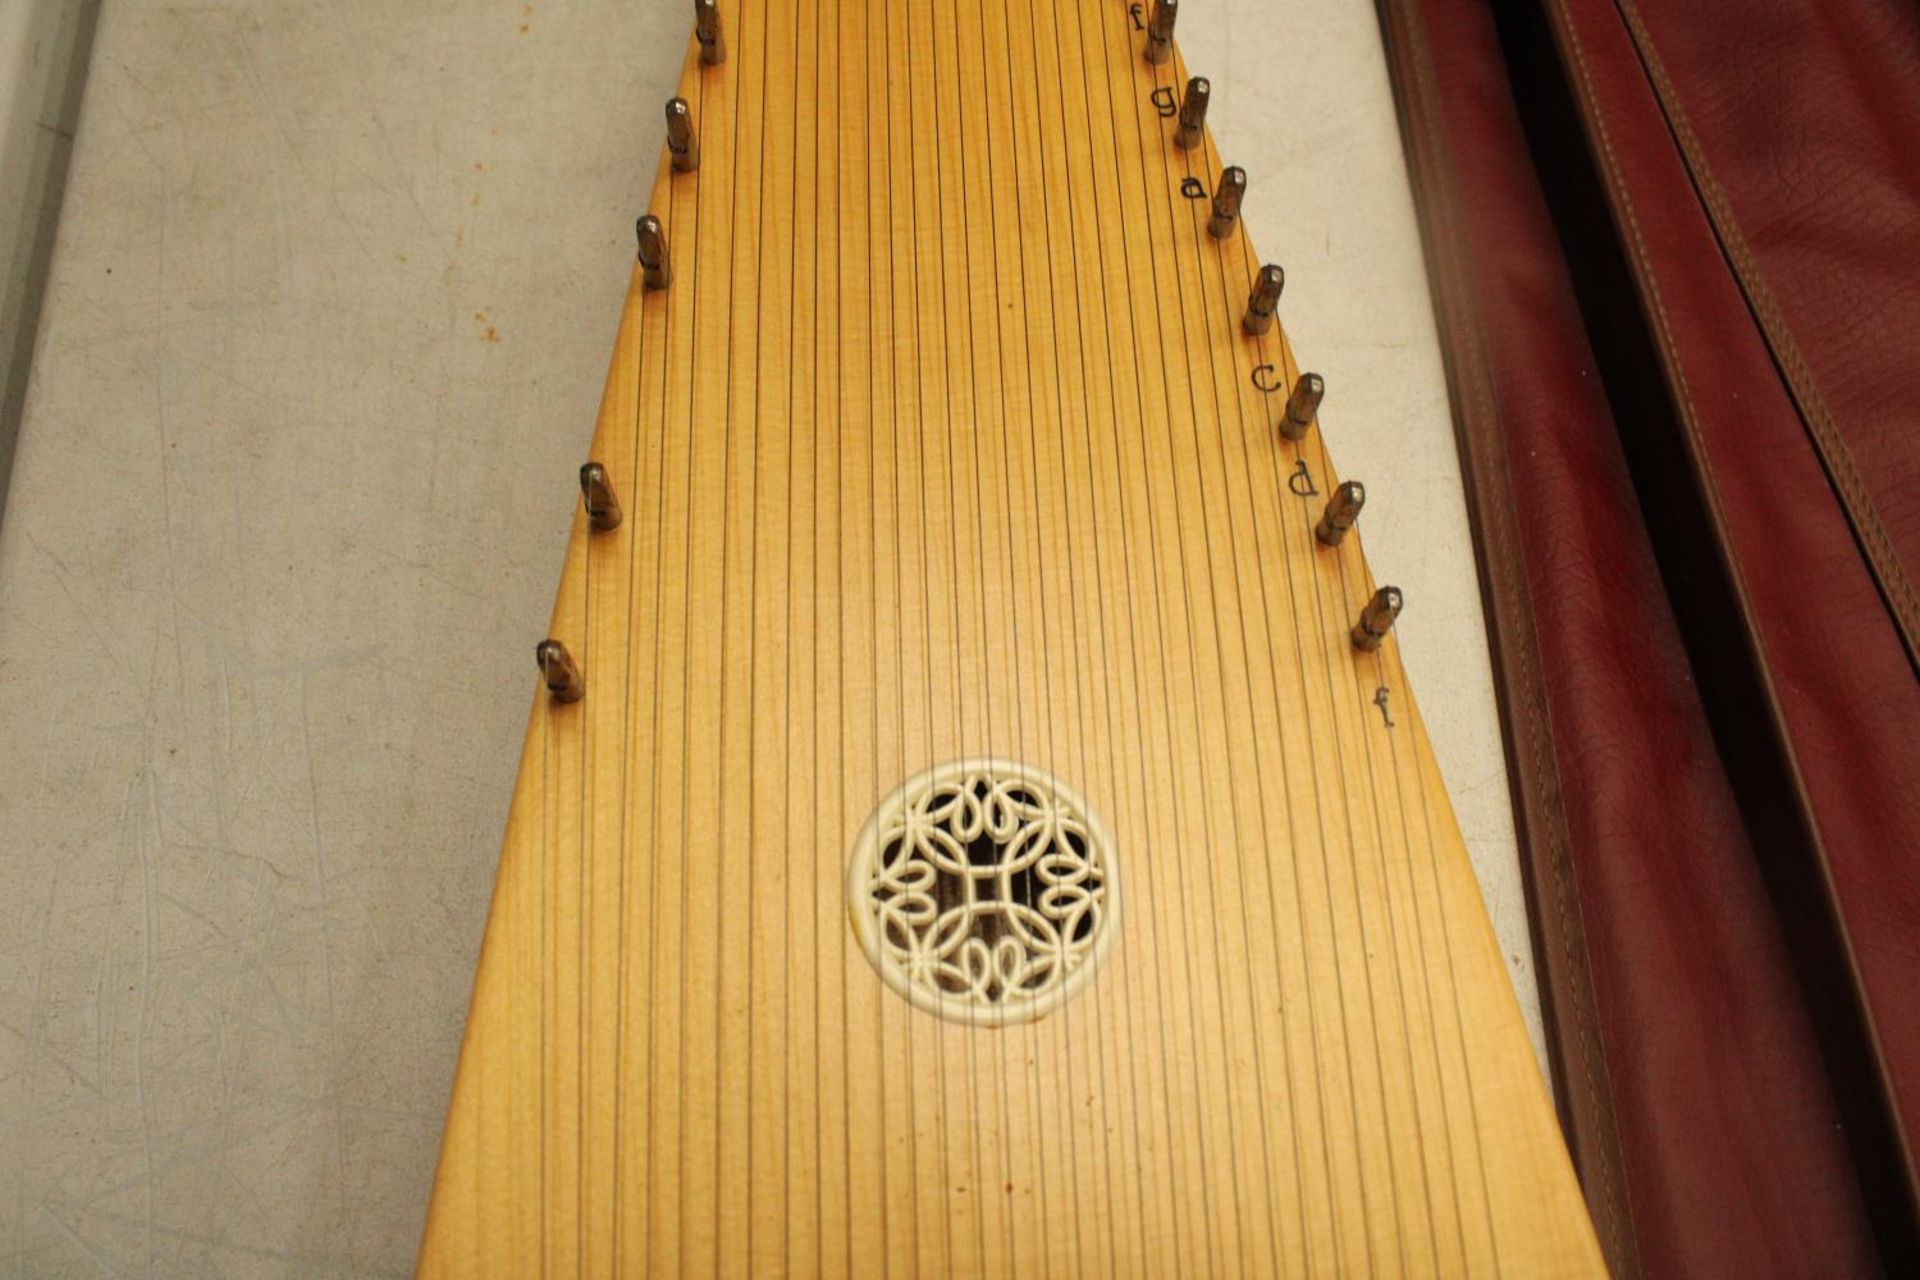 A HOPF PSALTERY WITH TUNING KEY AND STORAGE BAG - Image 3 of 3